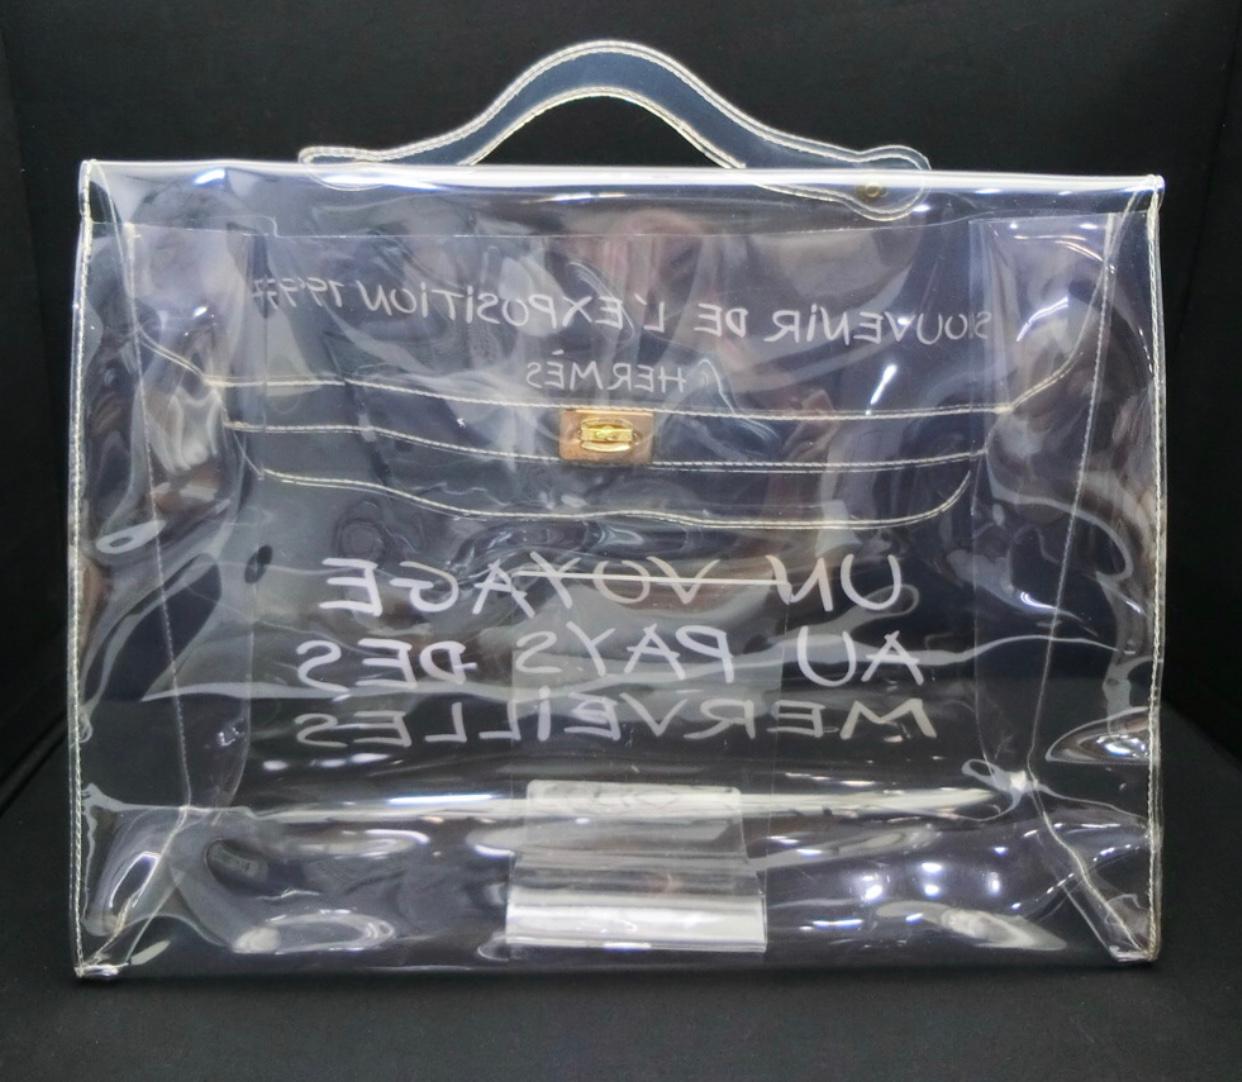 ****Please note****
This product(The vinyl Kelly bags) did not associate with dust bag or box either unlike regular merchandise because this was sold as the exhibition souvenir product held in the only selected department stores in Japan in 1997.